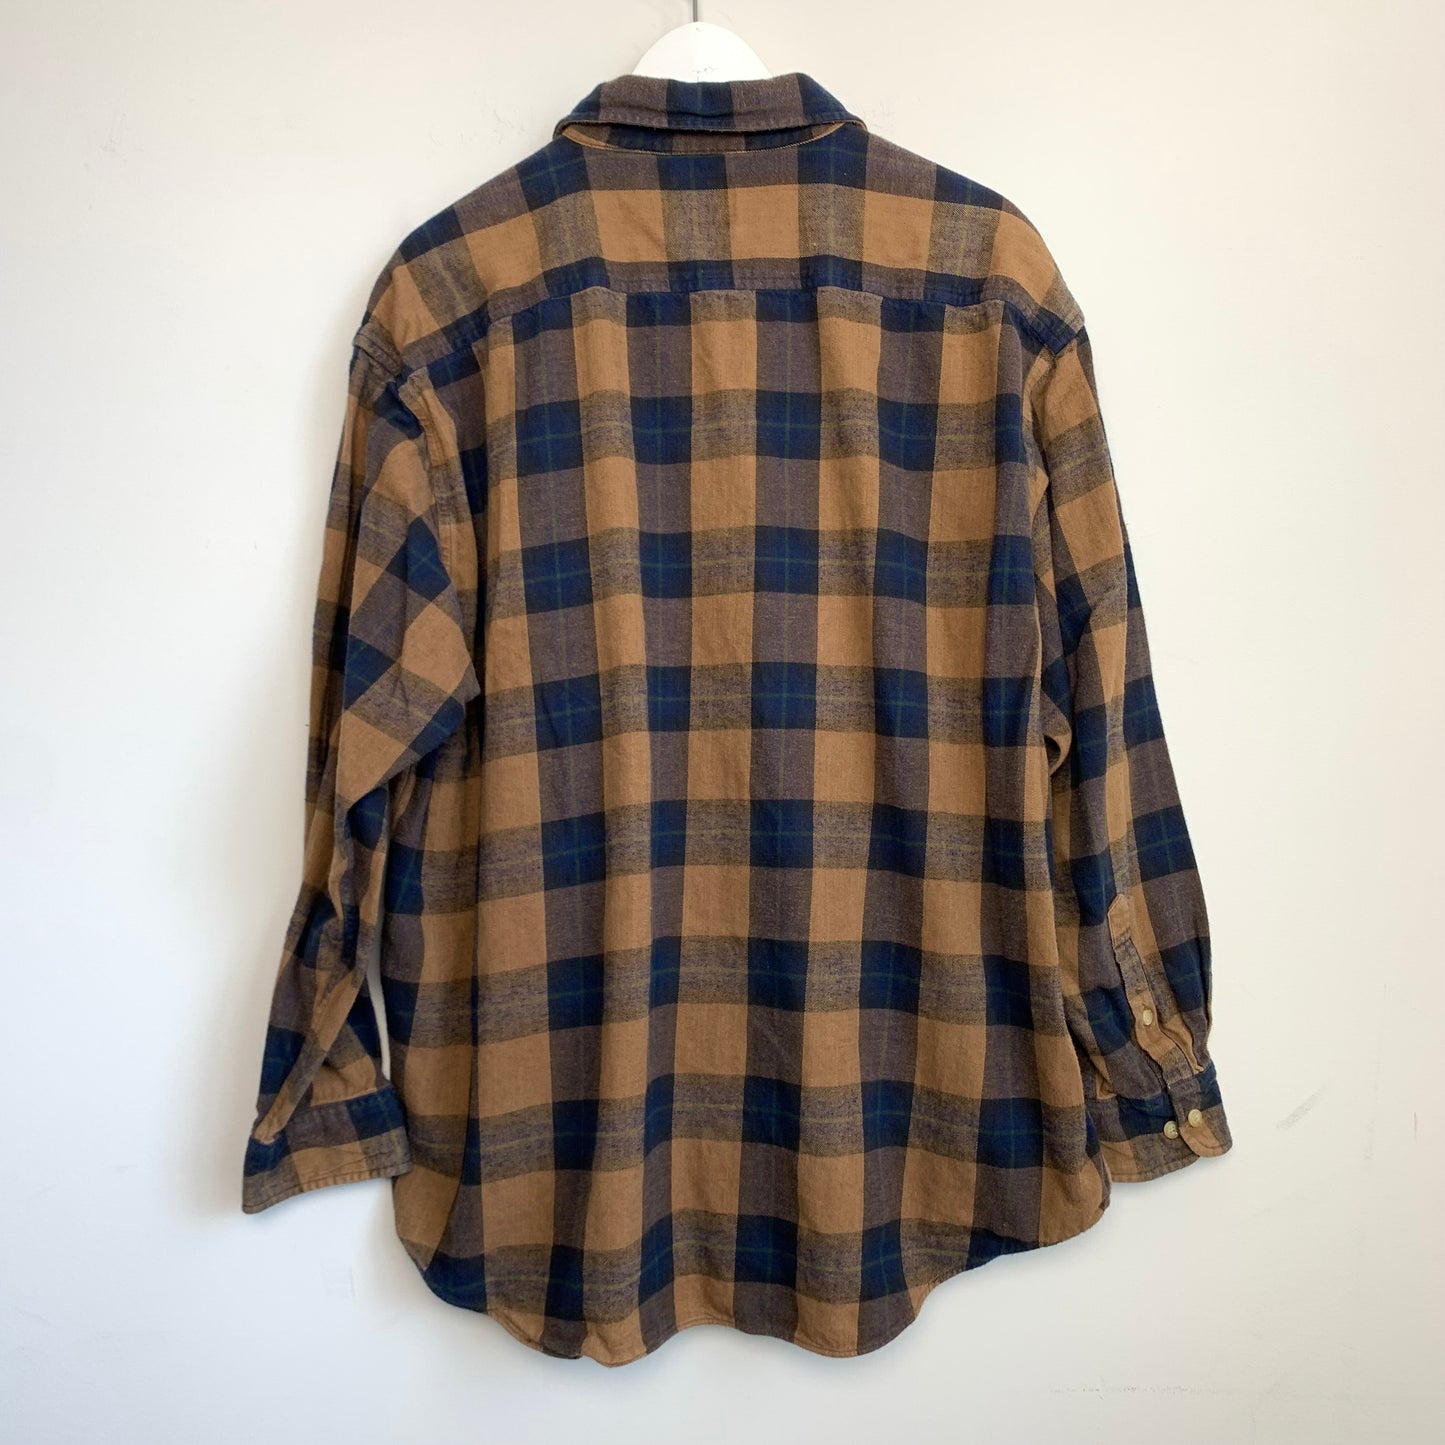 G.H. Bass & Co Flannel Plaid Shirt Jacket Shacket Size XL Cotton Navy Blue and Plaid